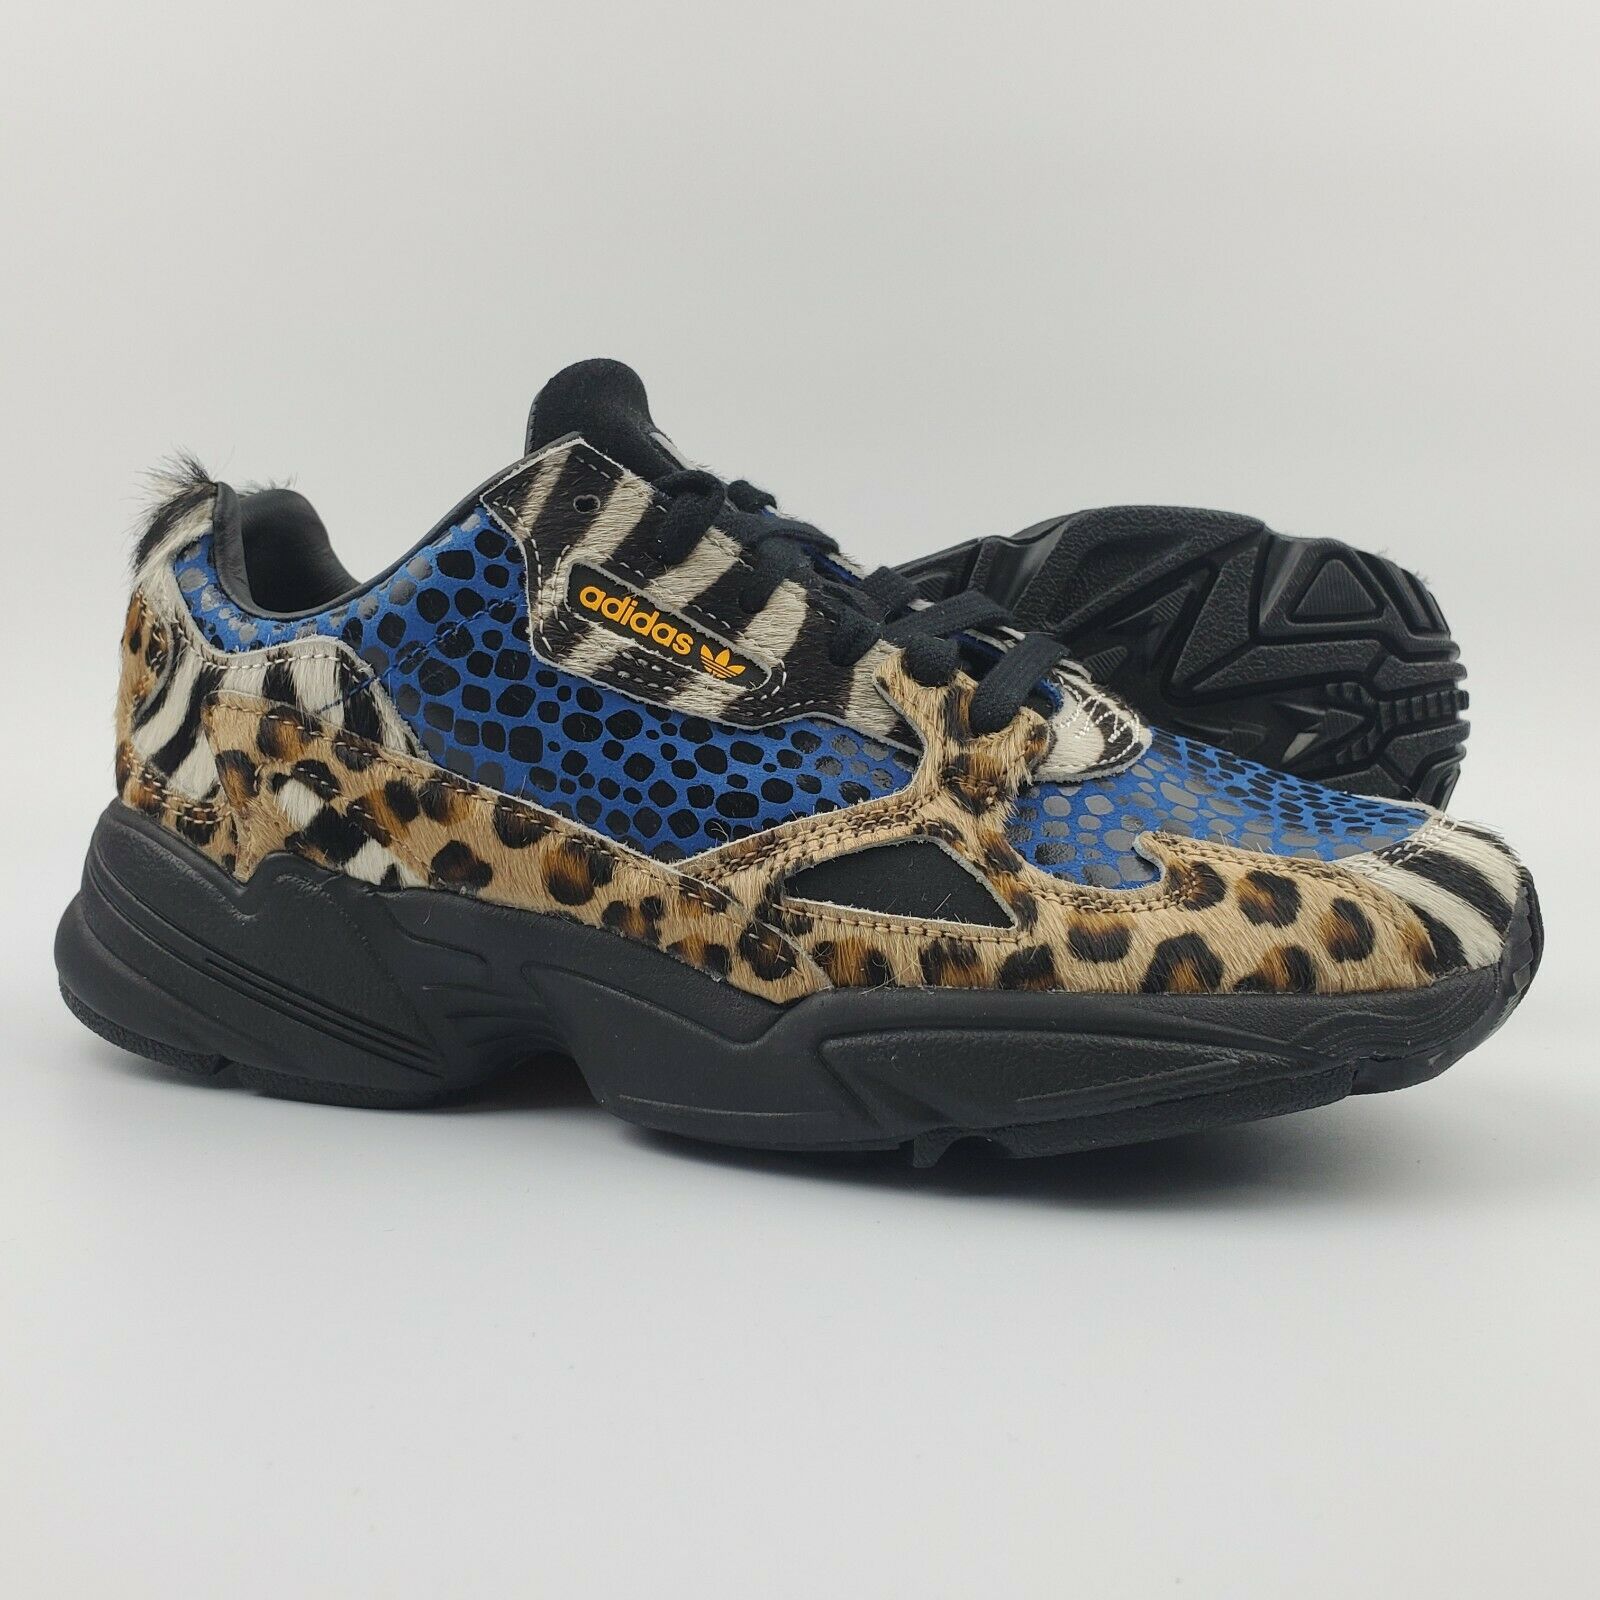 Adidas Falcon Out Loud Collection Animal Print Shoes Women's Size 7.5 Leopard